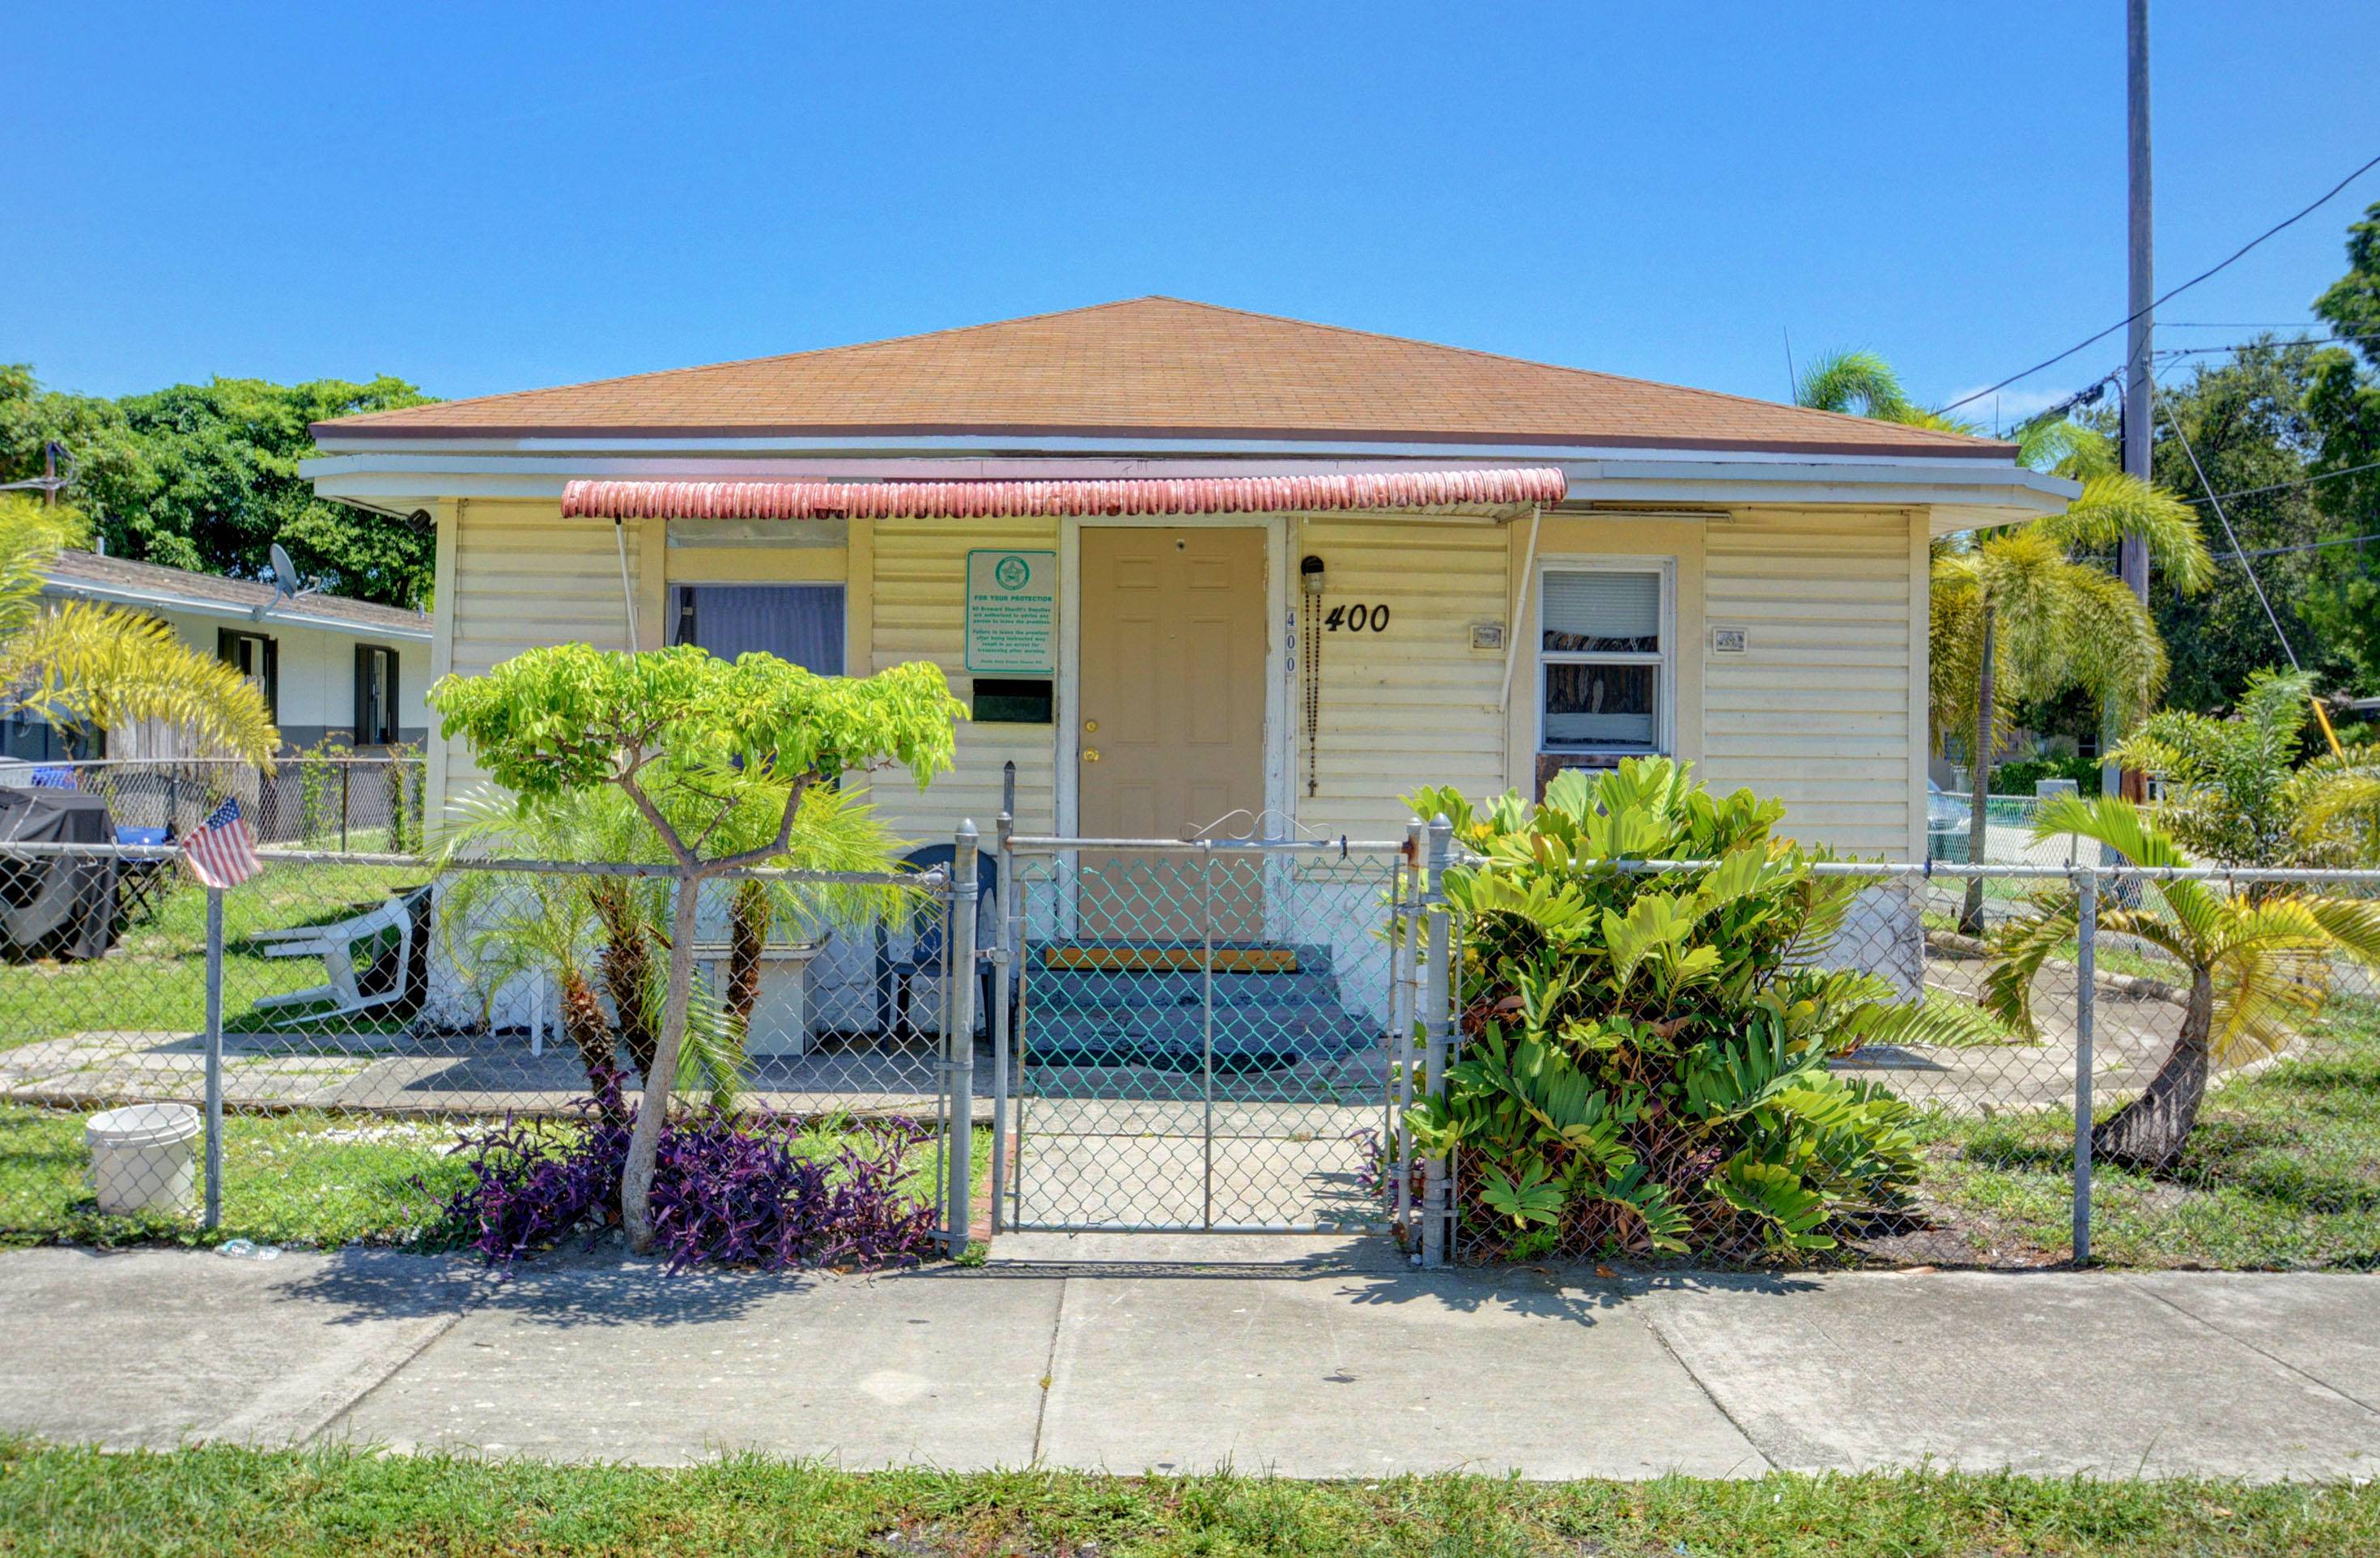 EXCELLENT 10 ROOM INCOME OPPORTUNITY IN EAST POMPANO, FEATURING GREAT UPSIDE.